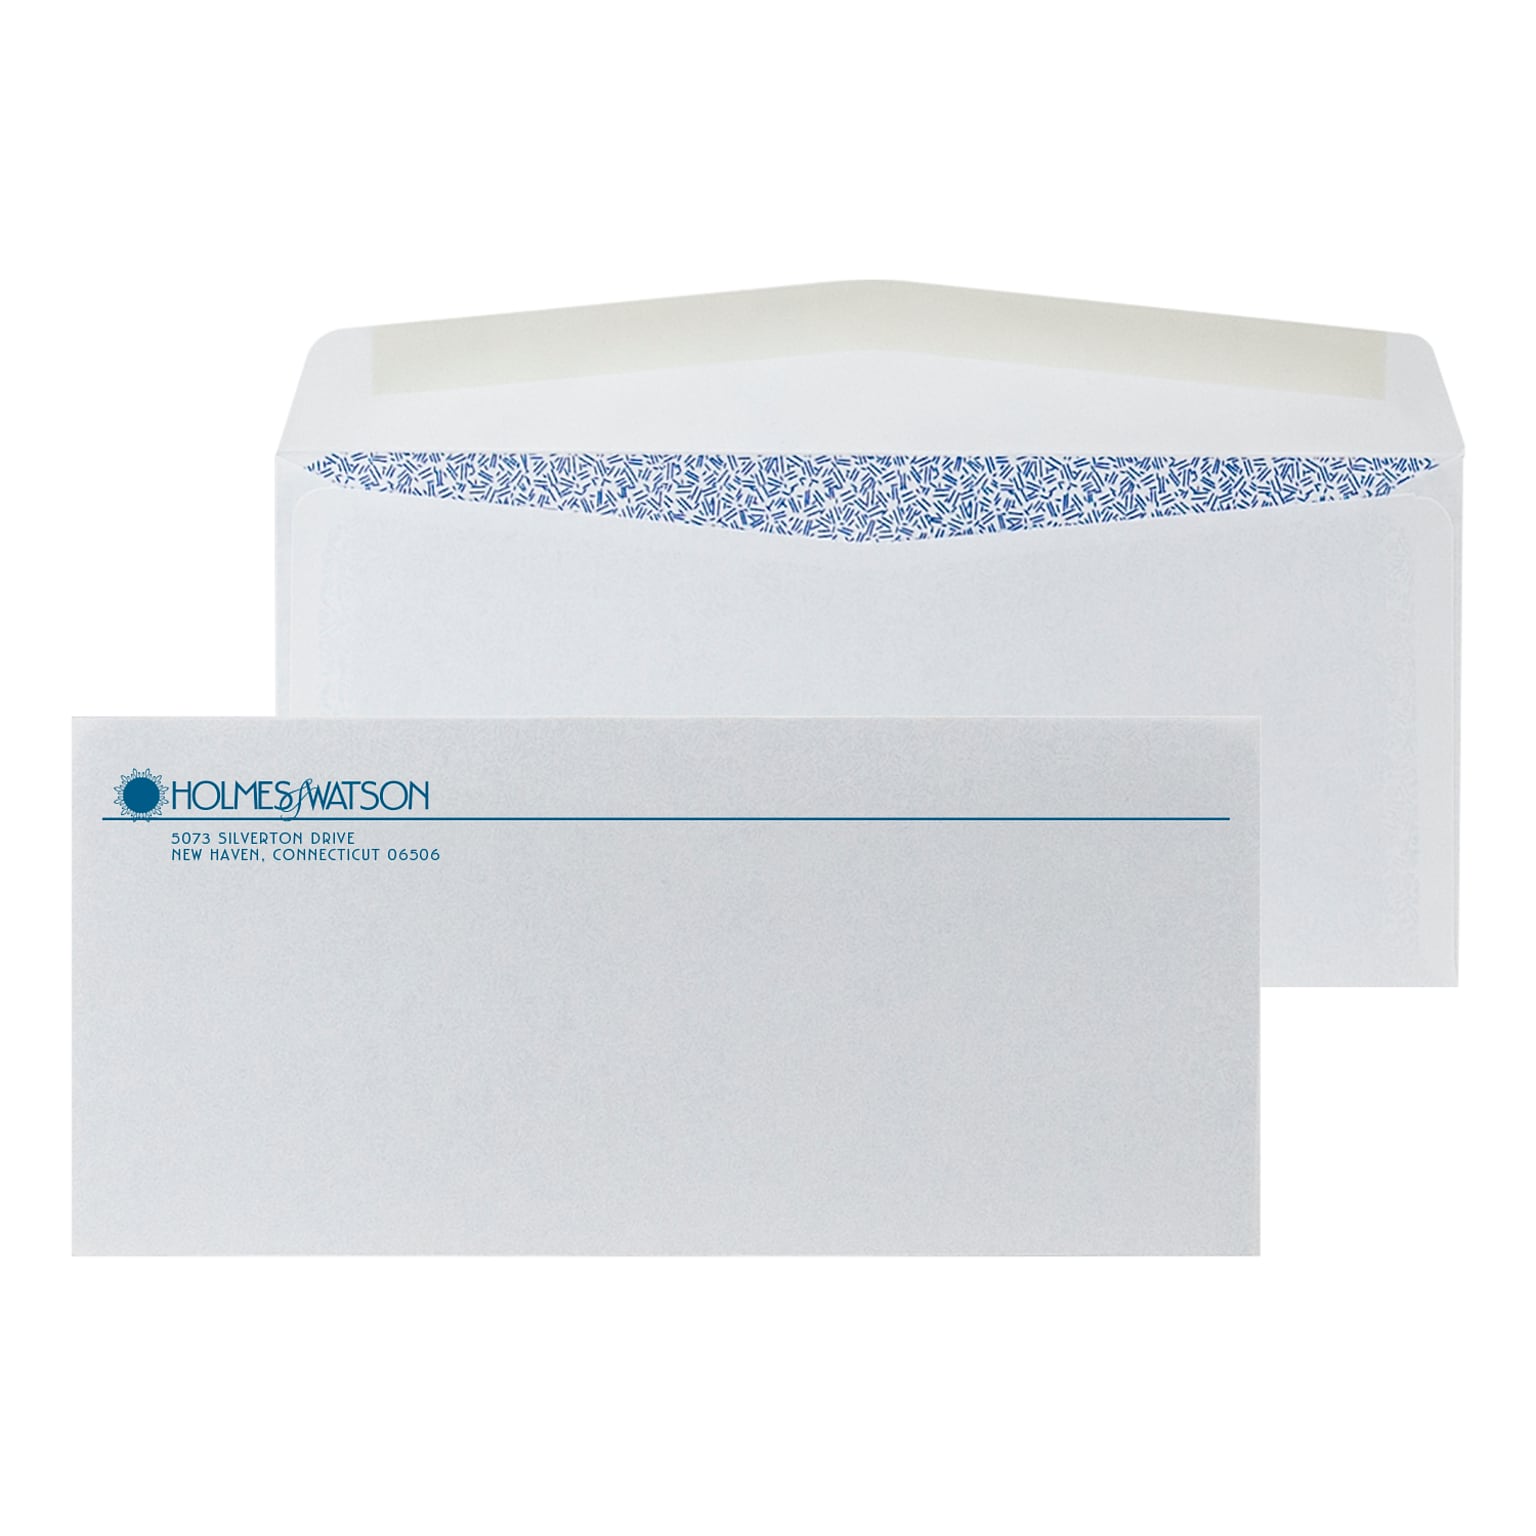 Custom Full Color #10 Standard Envelopes with Security Tint, 4 1/4 x 9 1/2, 24# White Wove, 250 / Pack